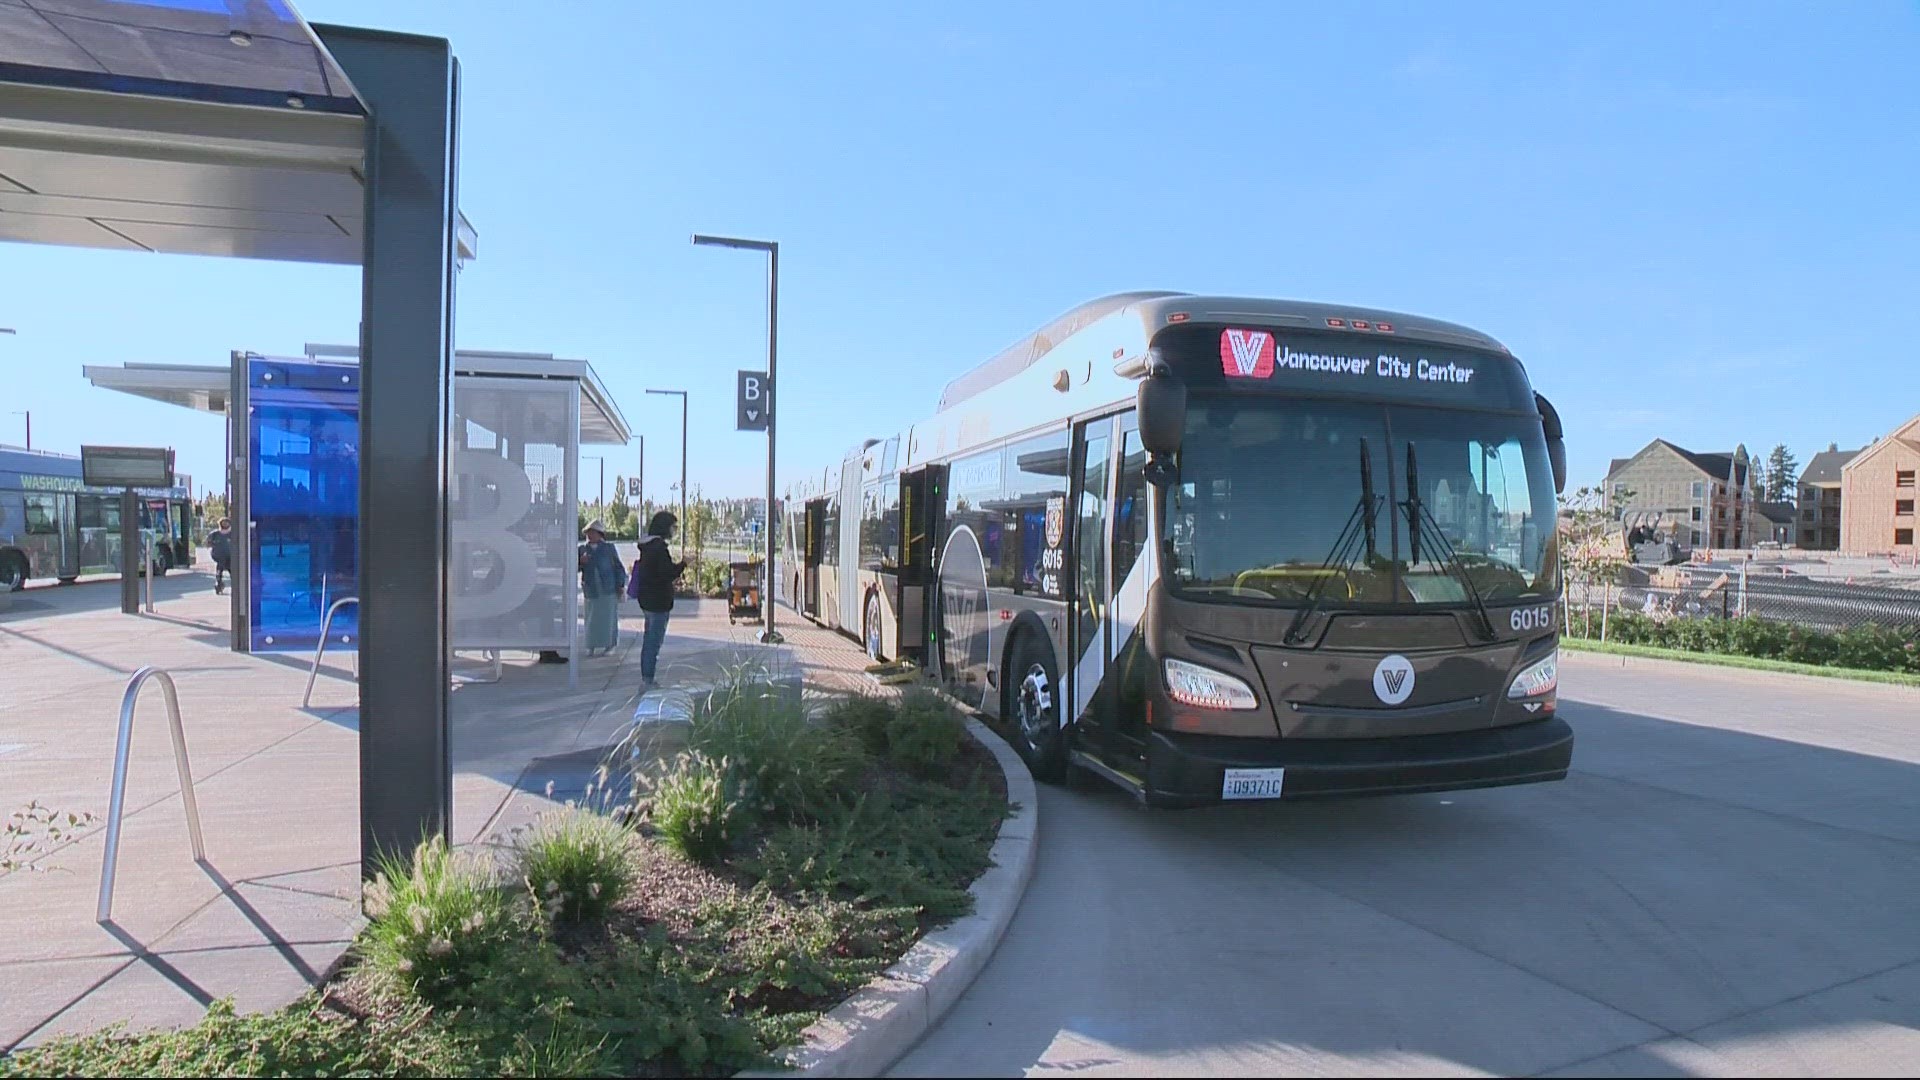 The agency expanded its bus rapid transit system to Vancouver's second-busiest transit corridor after seeing success along Fourth Plain Boulevard